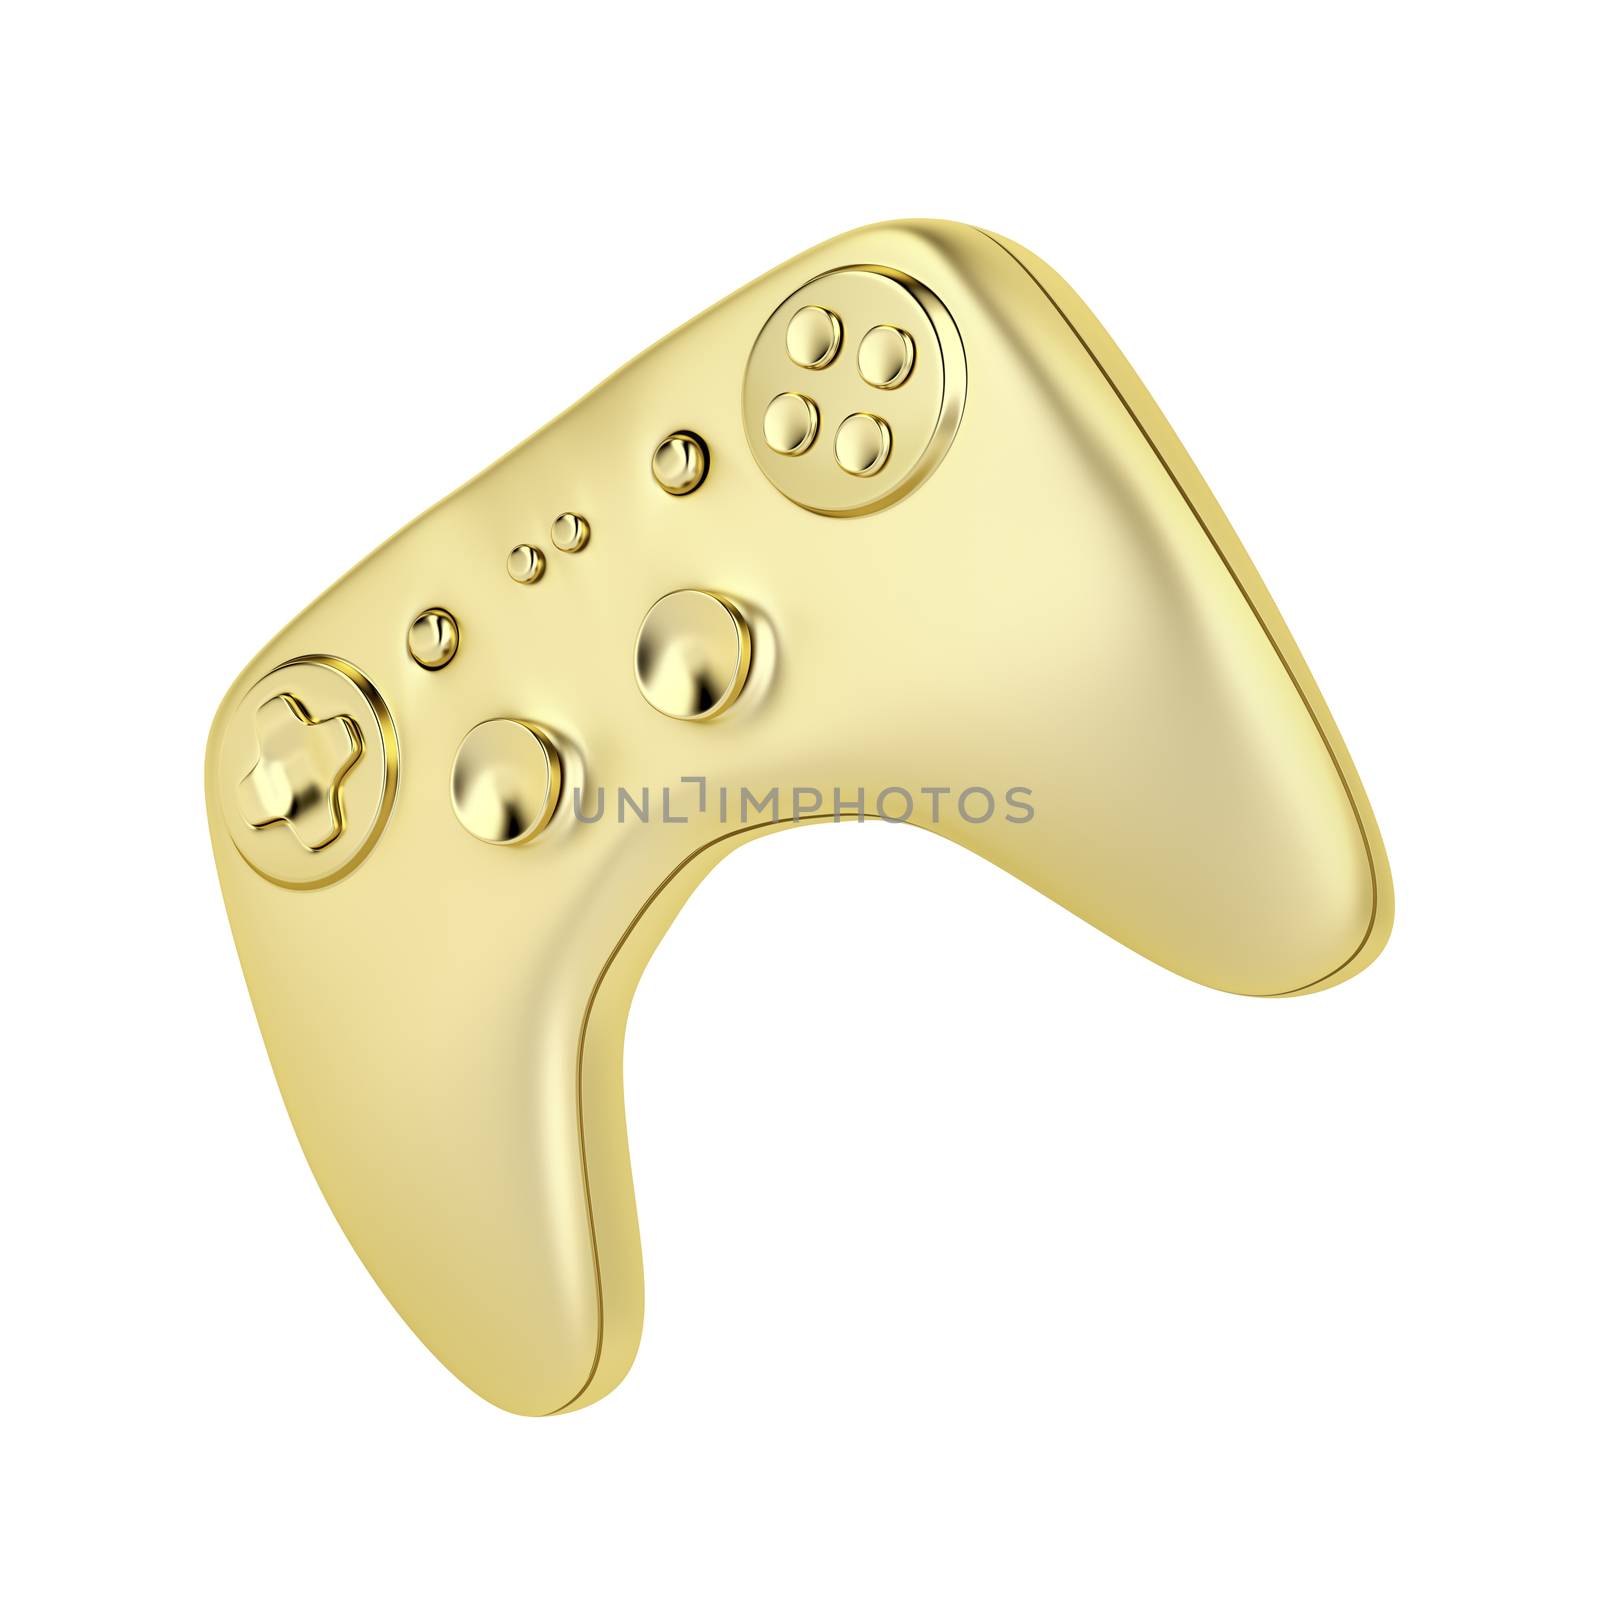 Golden gaming controller by magraphics